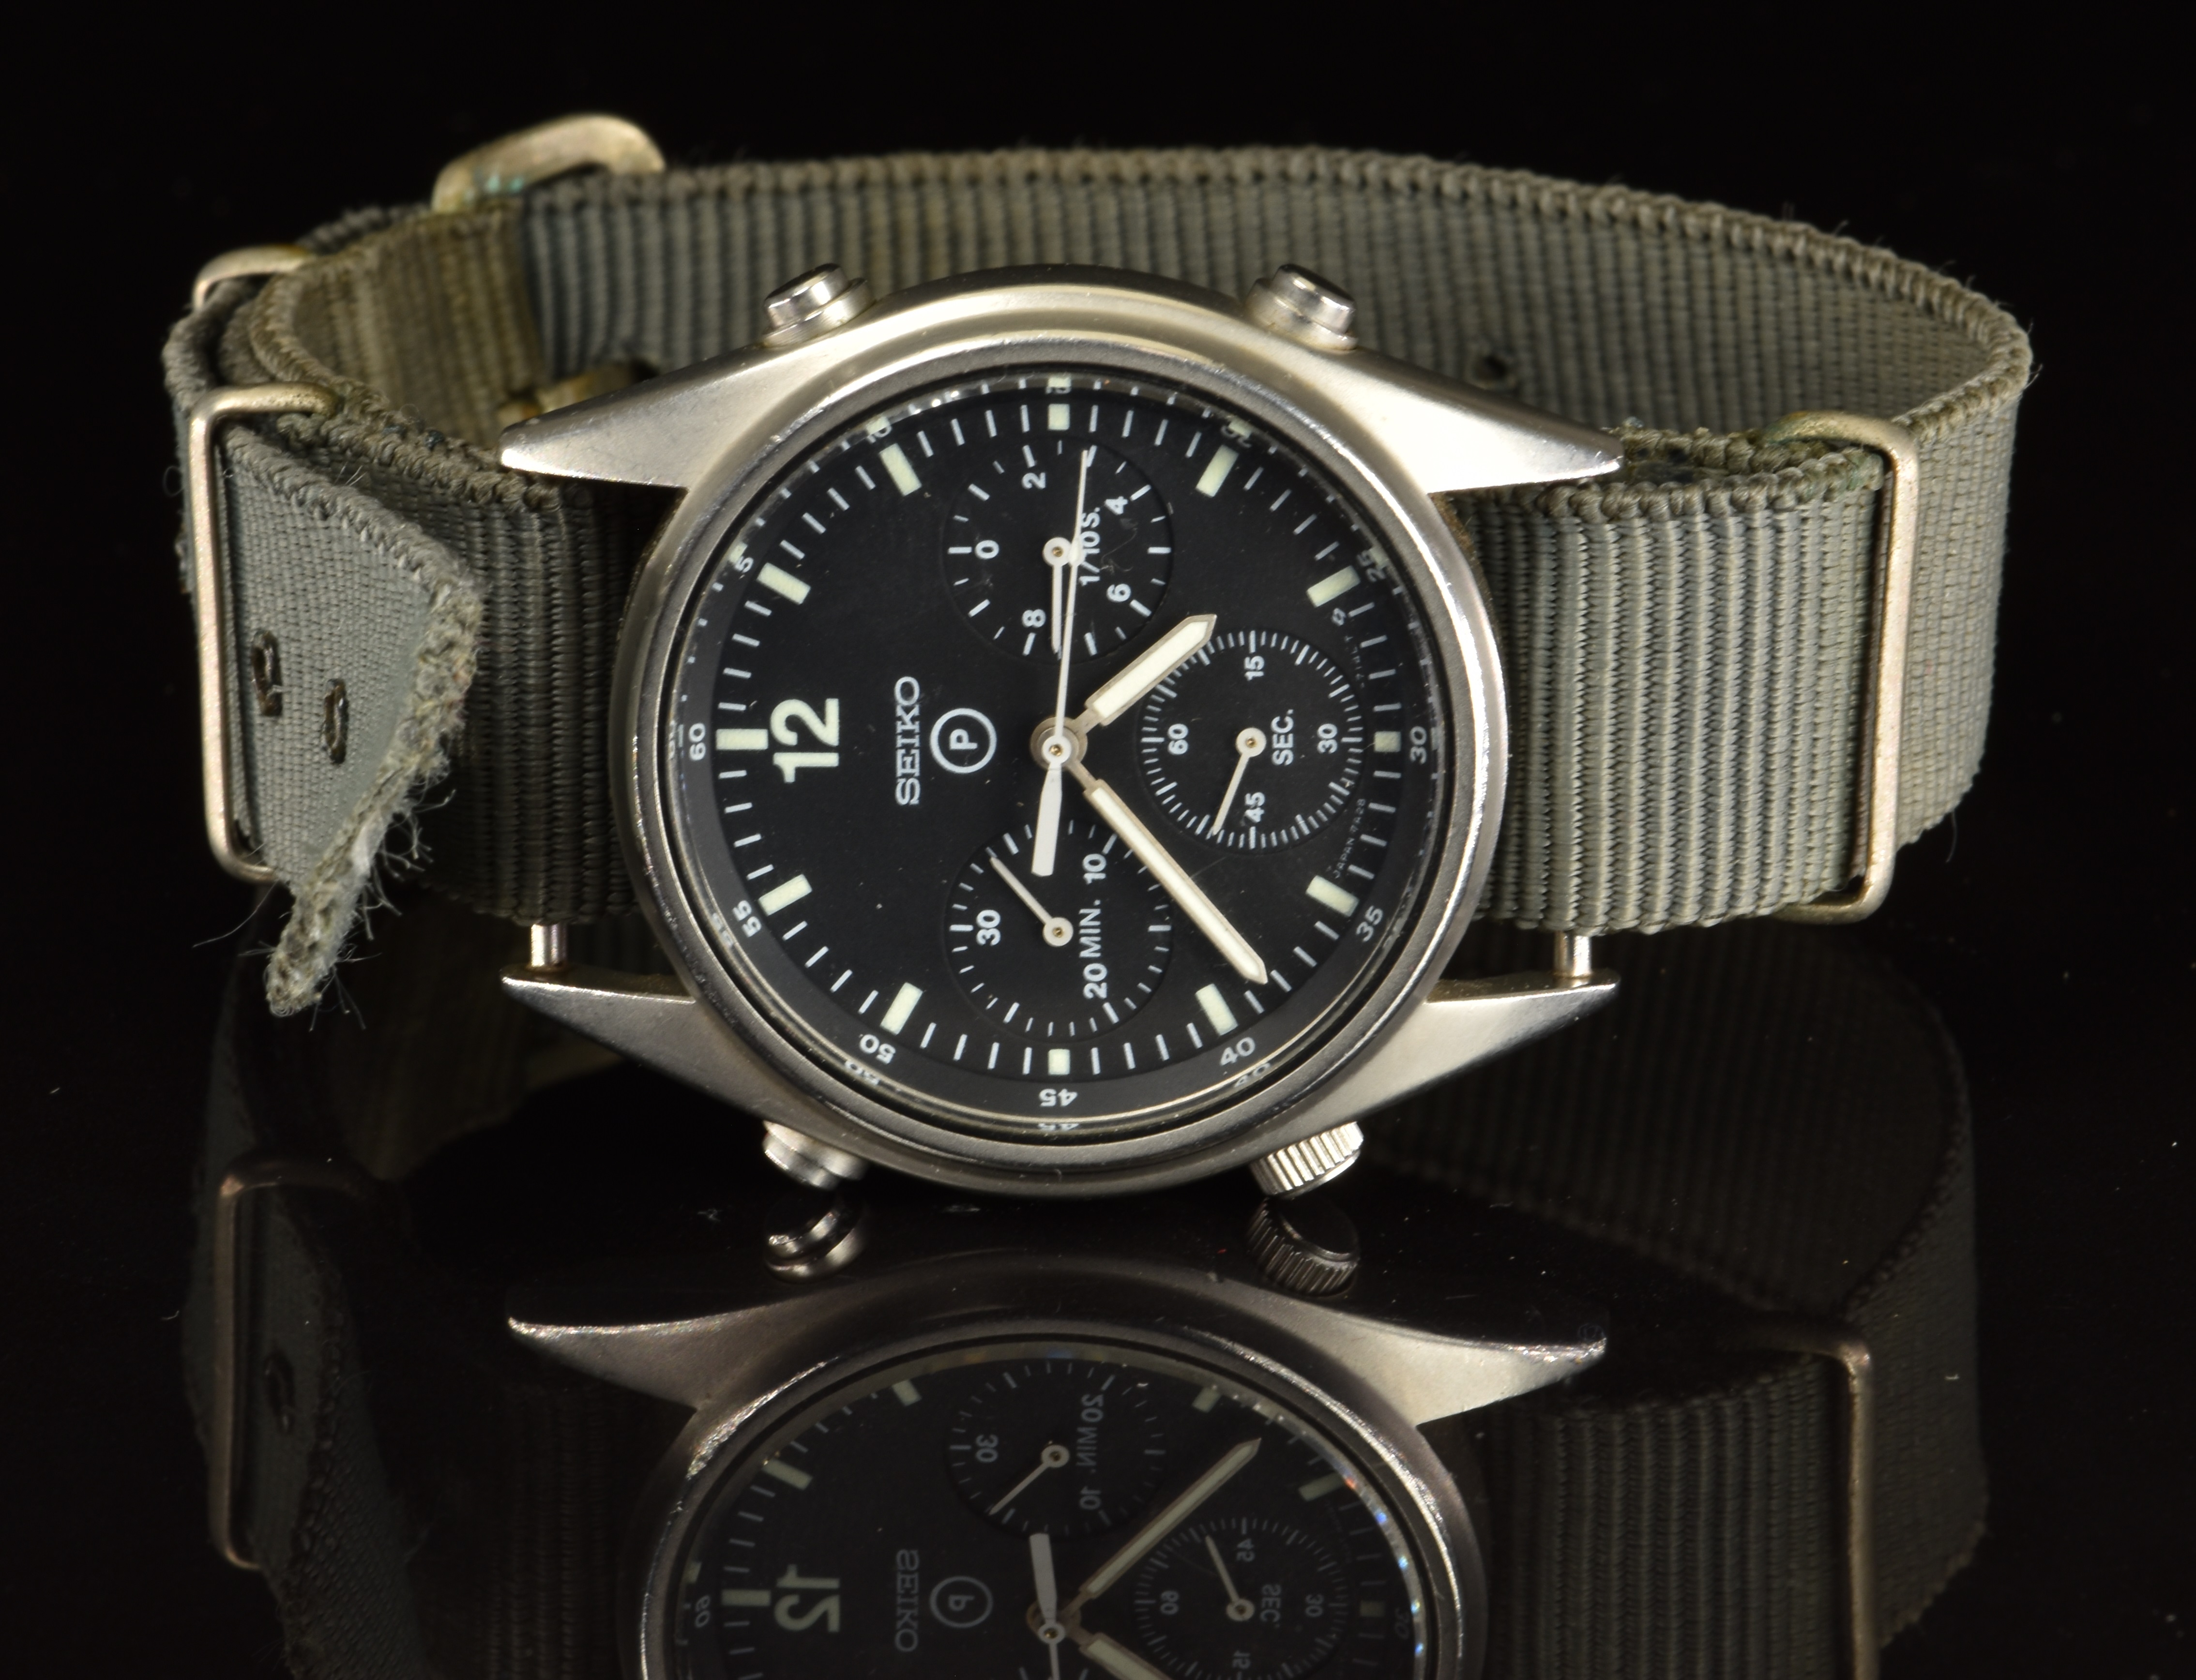 Seiko gentleman's military issue wristwatch ref. 7N32-0BC0 with luminous hands and hour markers, - Image 2 of 4